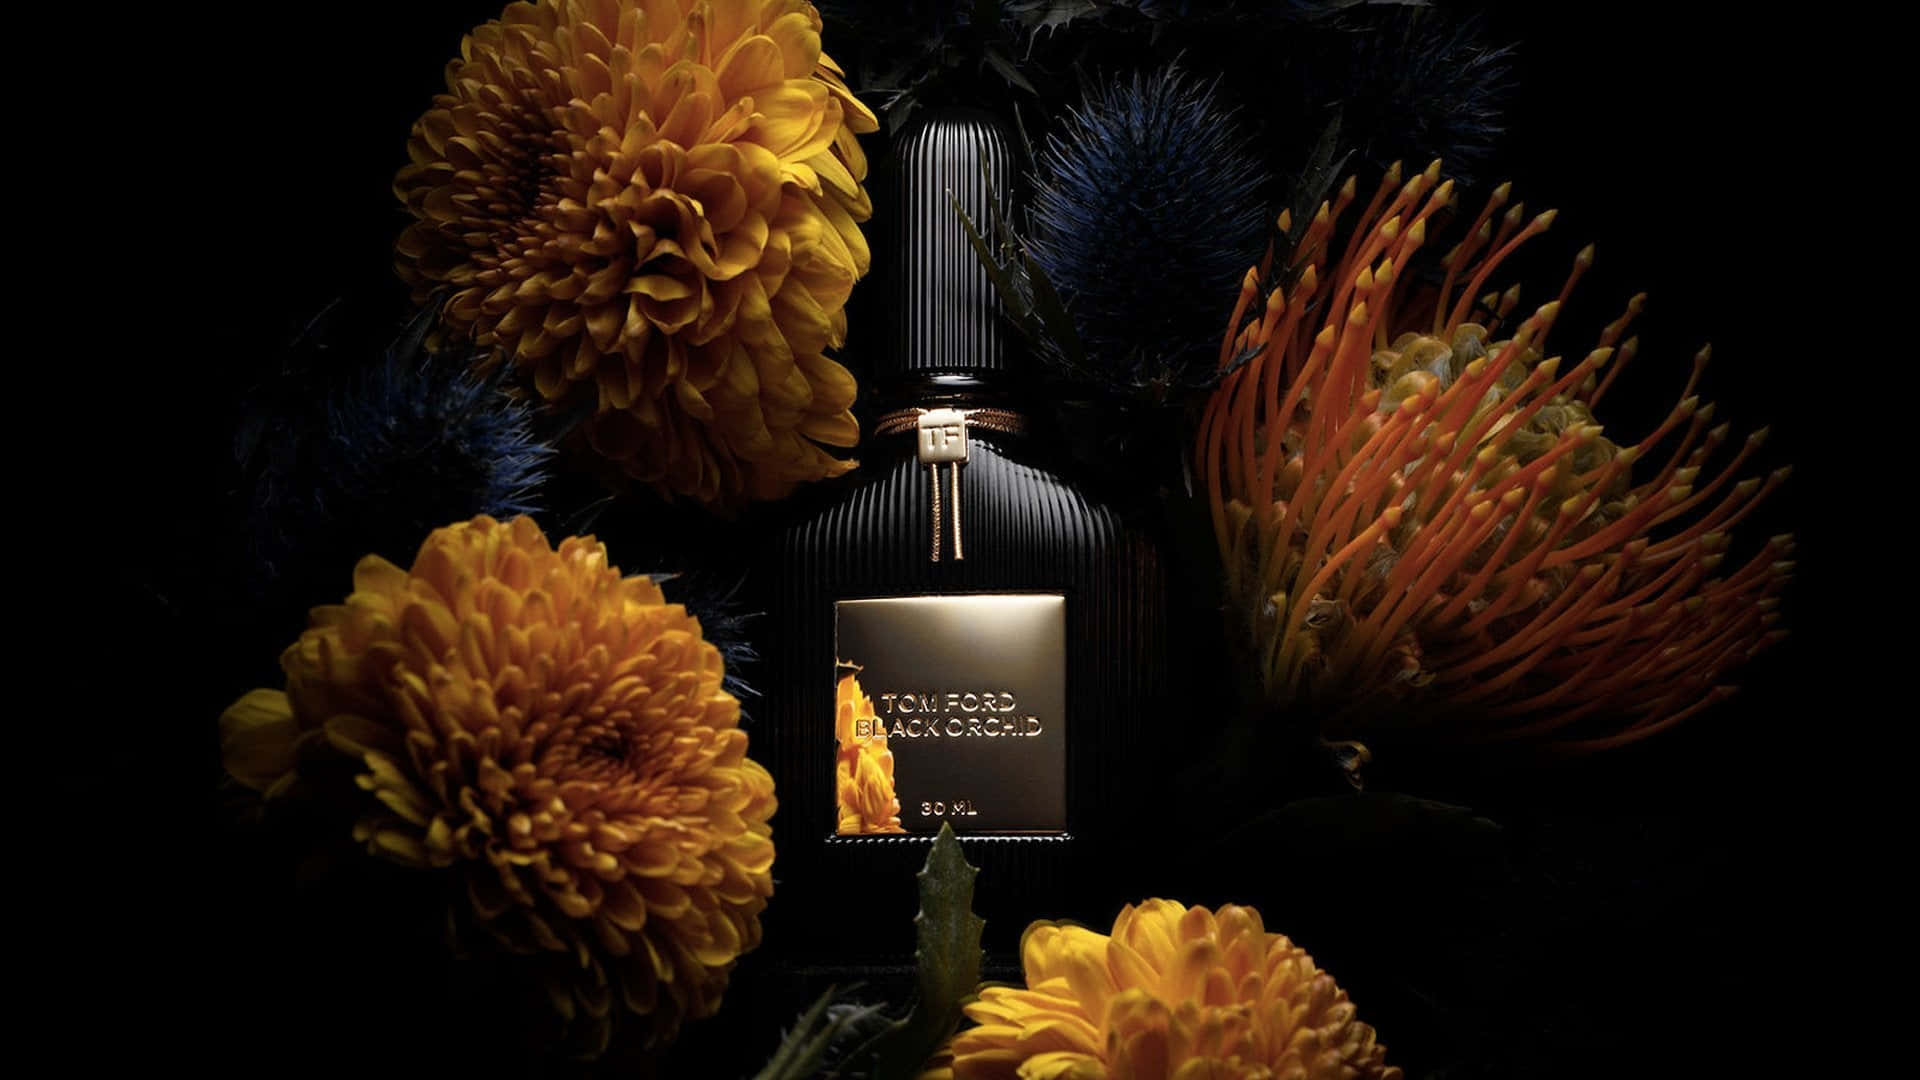 Enchanting Floral Fragrance - A Blissful Sensory Experience Wallpaper